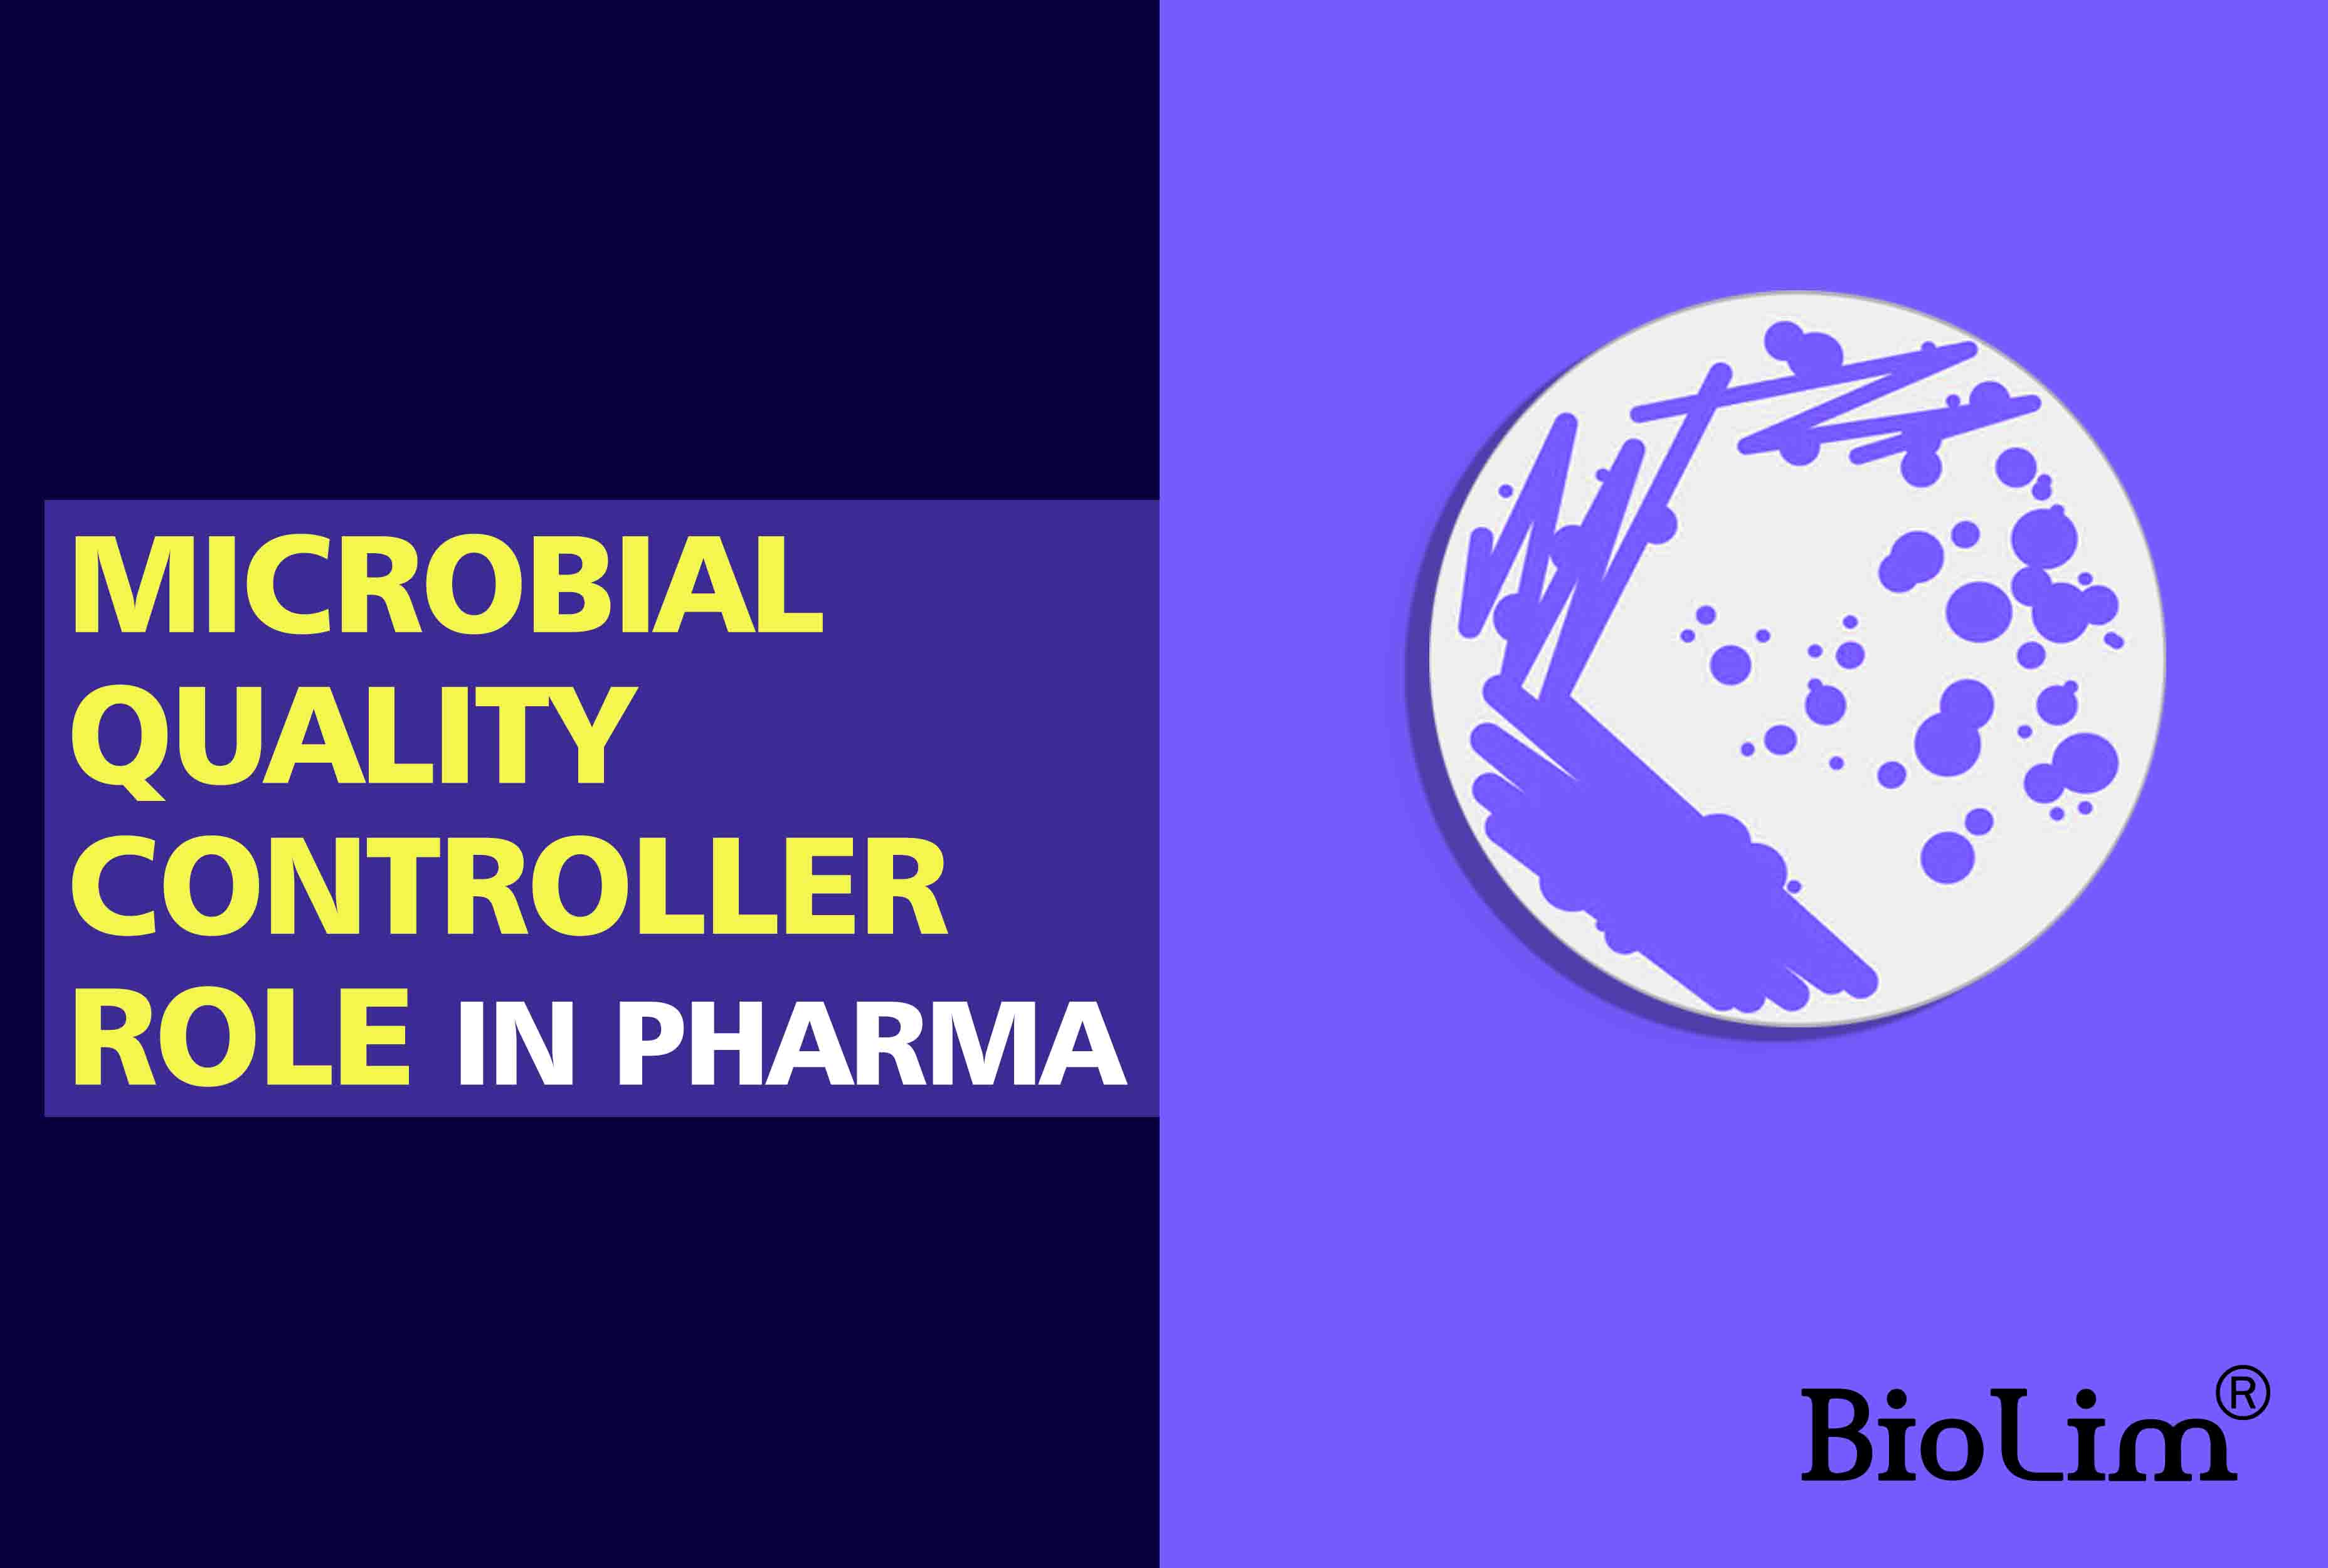 Internship on microbial quality controller role in pharma